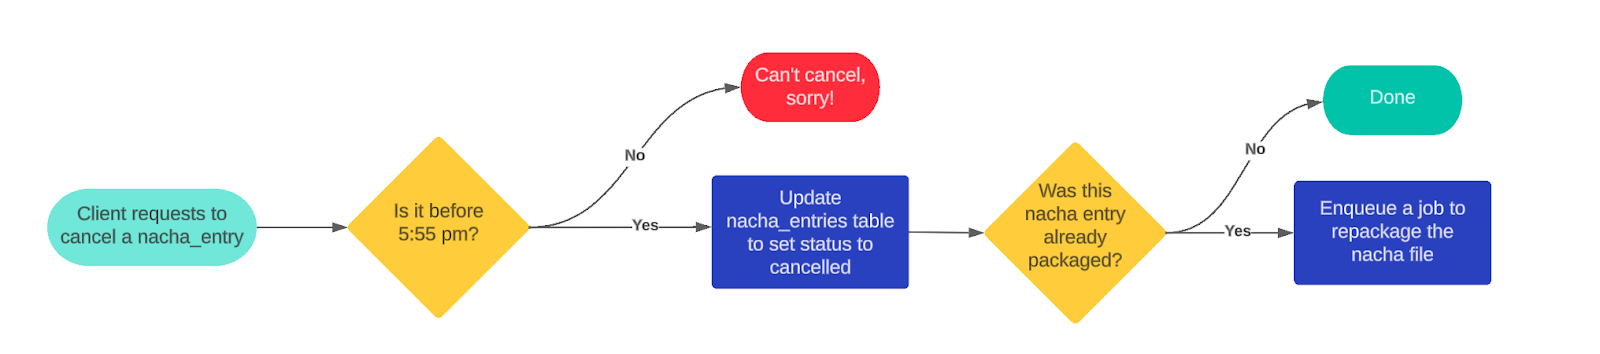 A flow diagram explaining how cancellations were evaluated